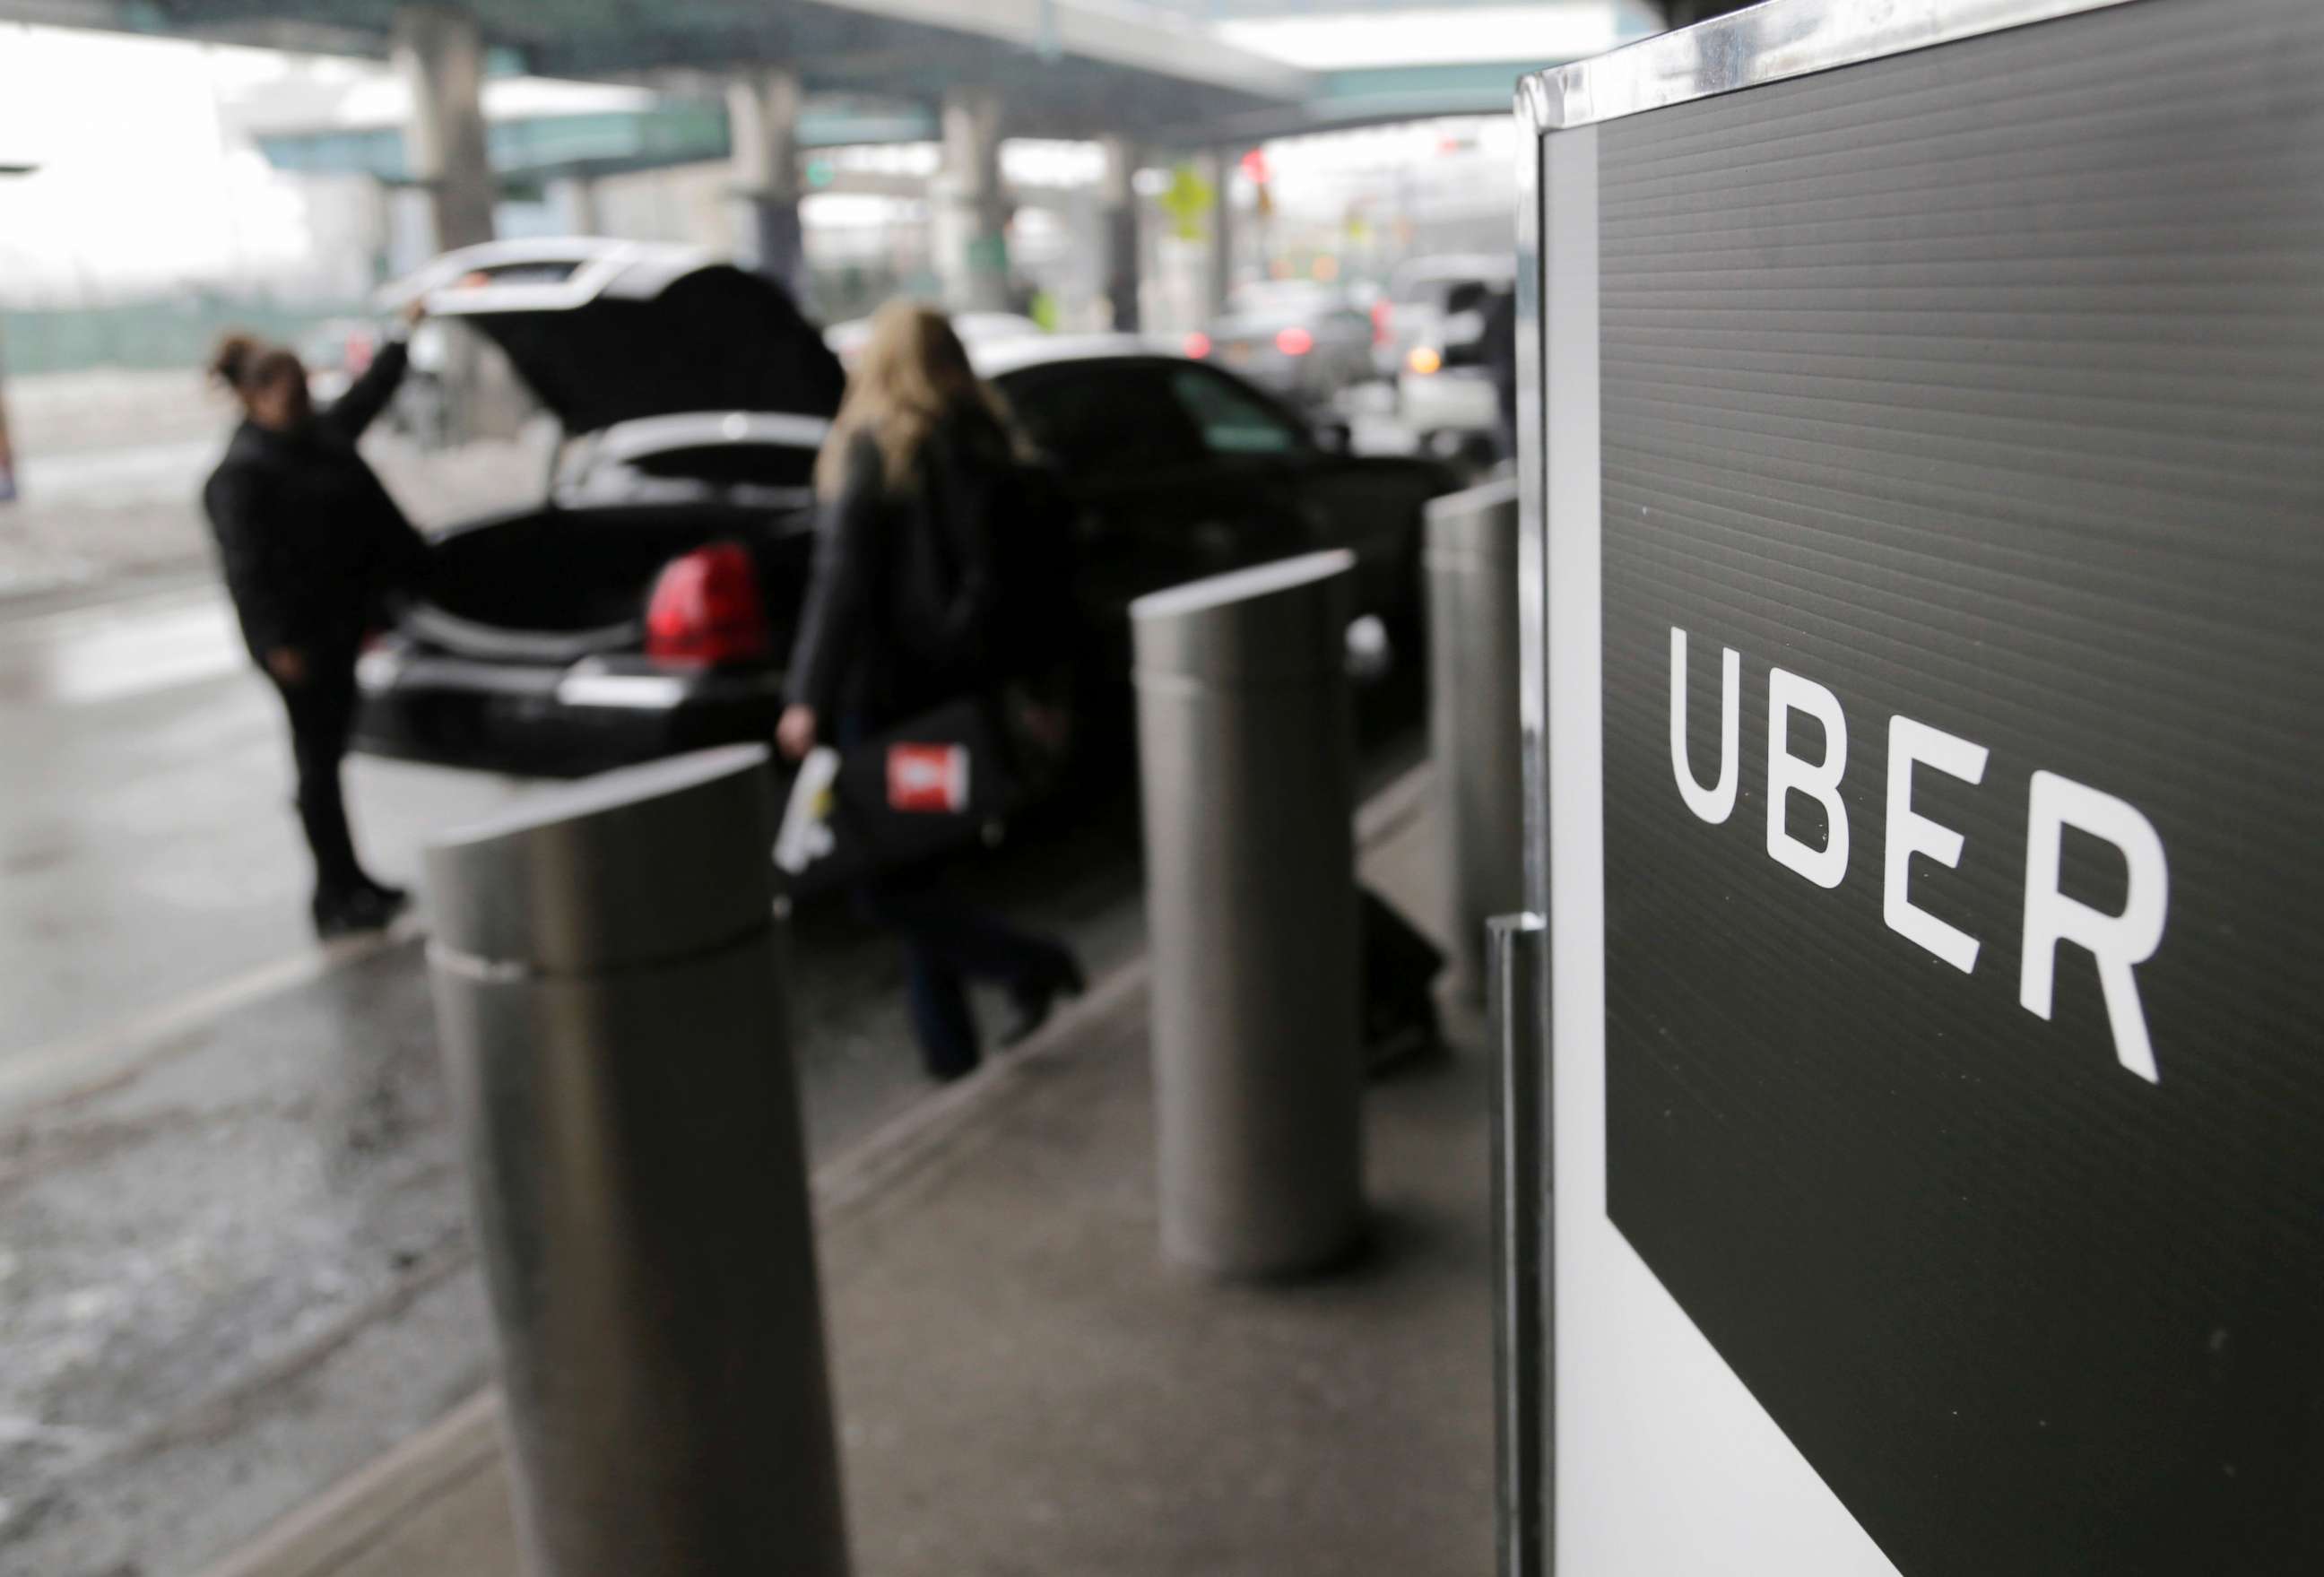 PHOTO: A sign marks a pick up point for the Uber car service at LaGuardia Airport in New York, March 15, 2017.